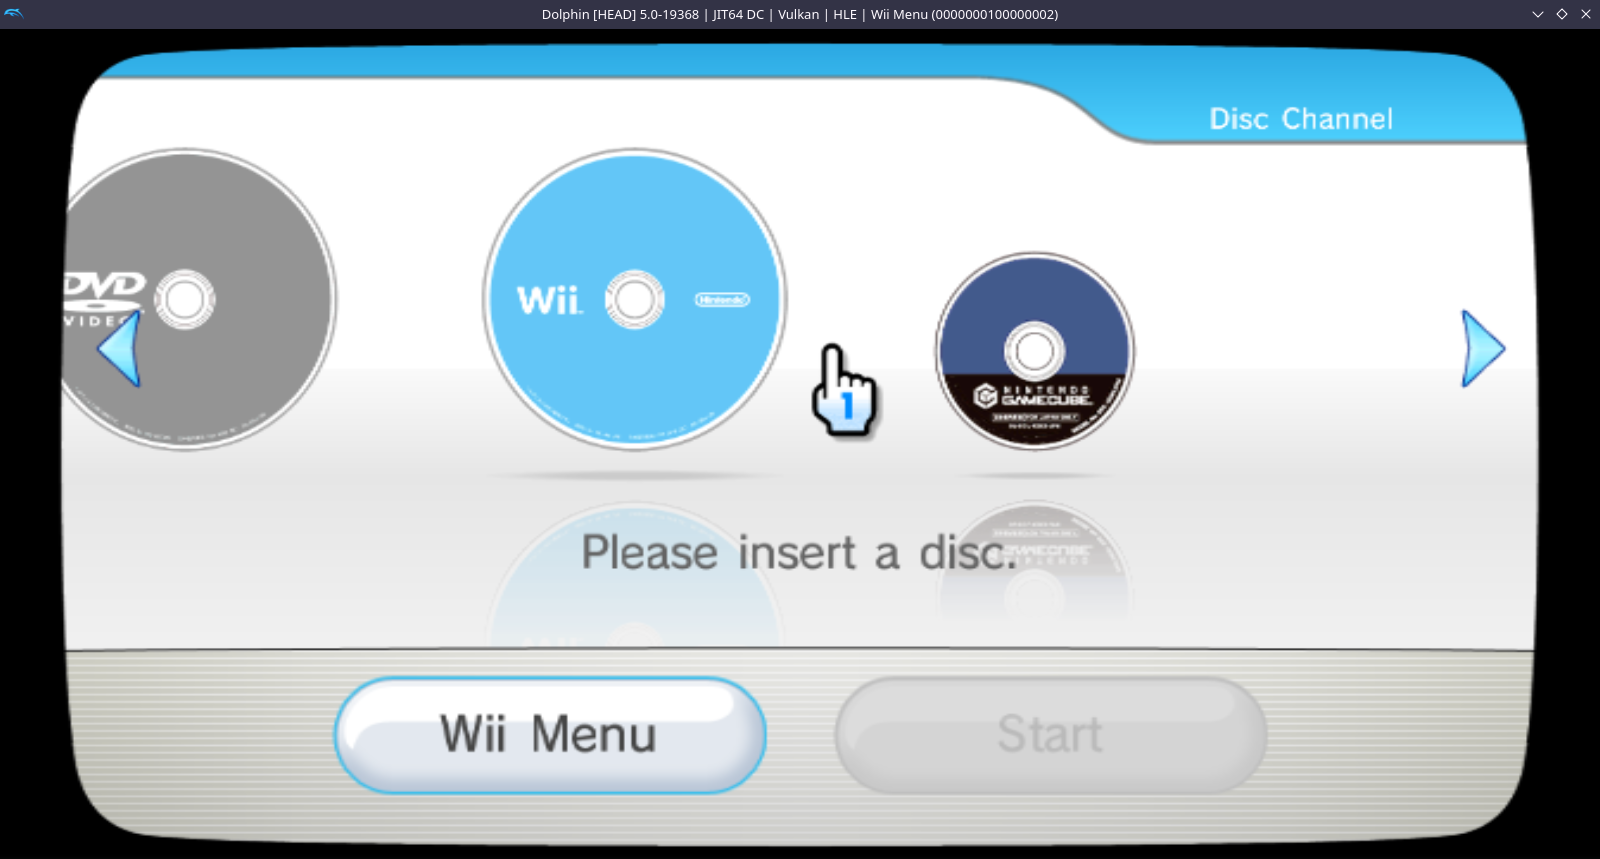 A screenshot of the Disc Channel in Dolphin with the DVD icon shown.